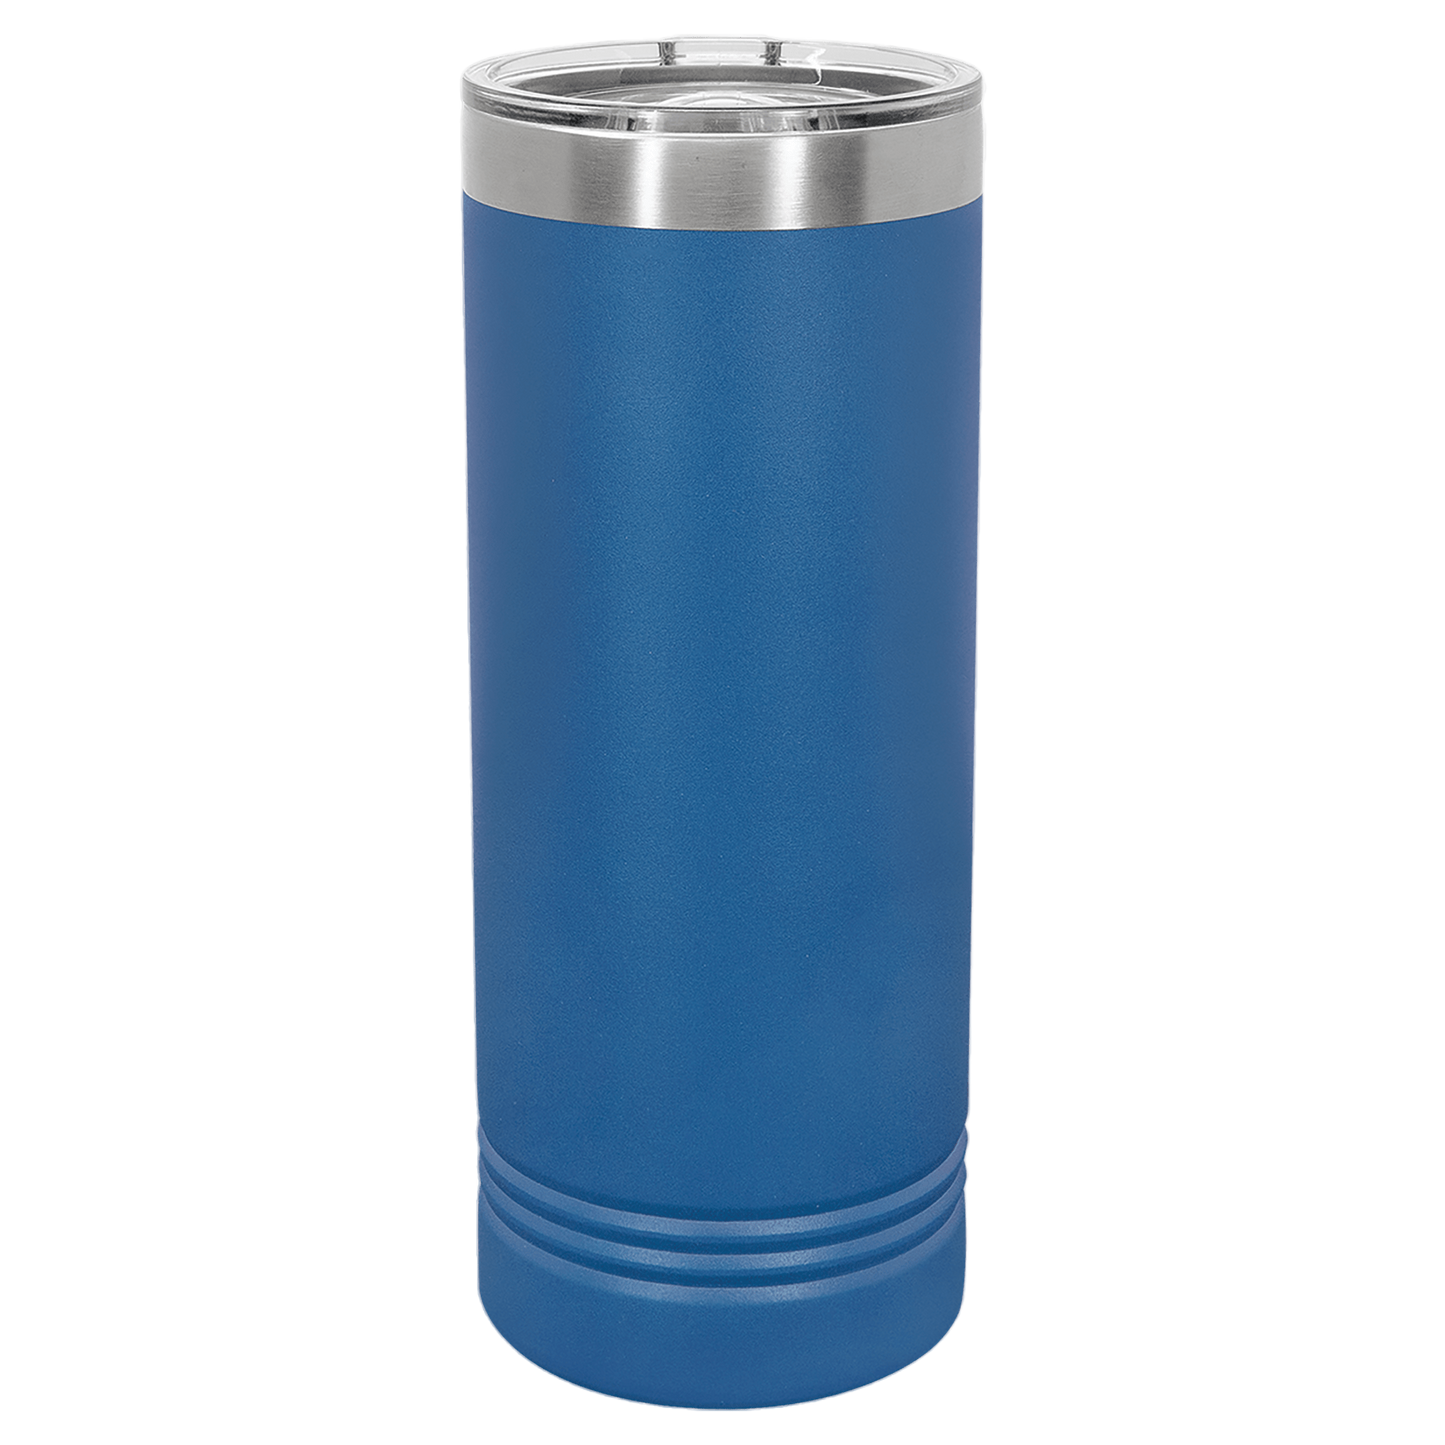 Softball Mom 22 oz. Insulated Tumbler - with or without the number